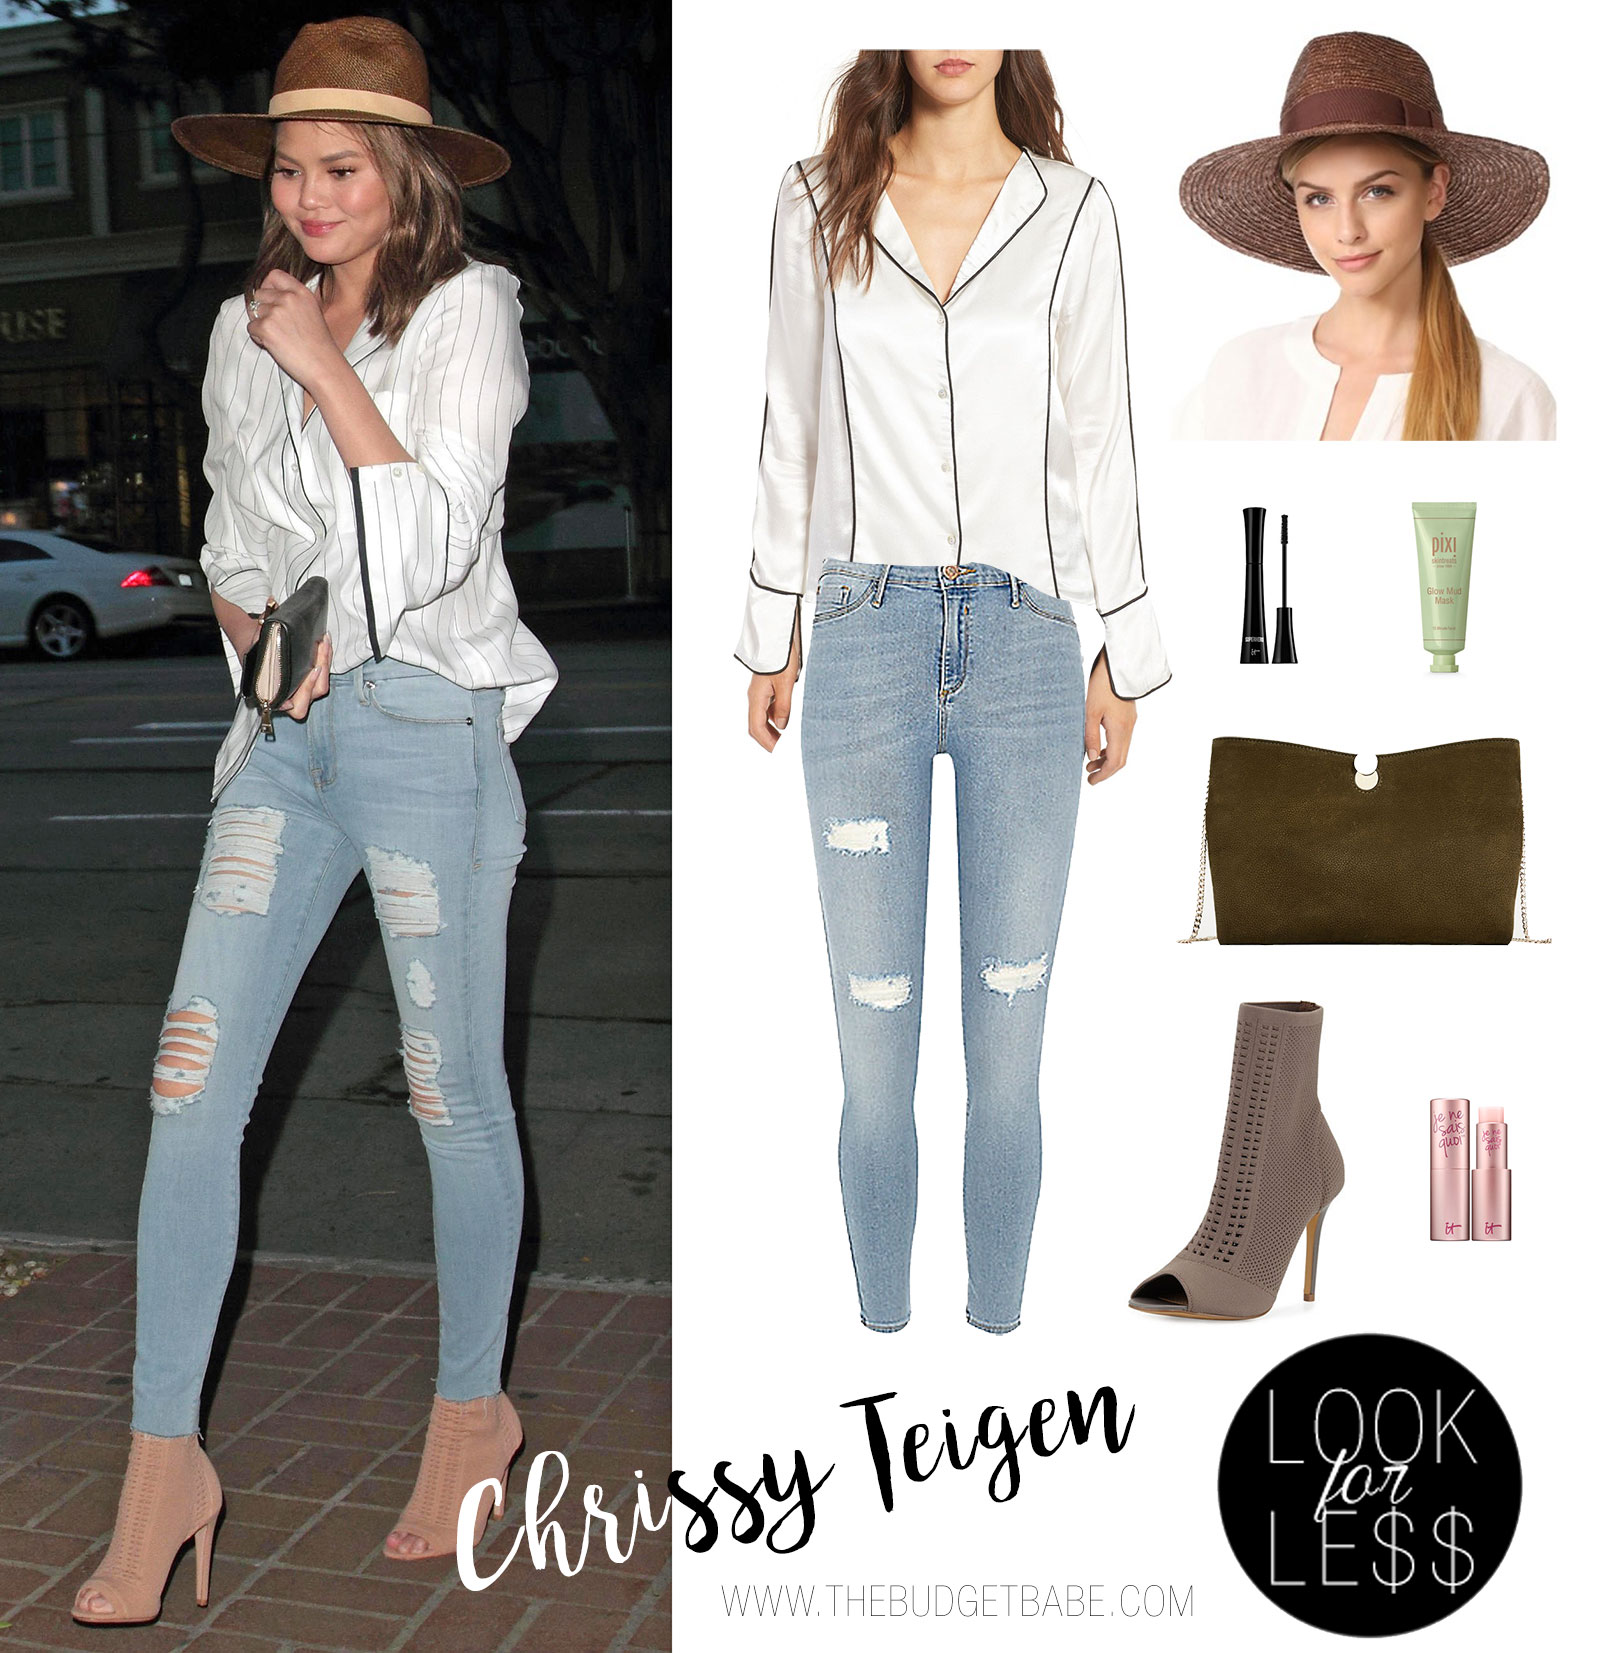 Chrissy Teigen wears the pajama trend with a Frame silk shirt and distressed skinny jeans.